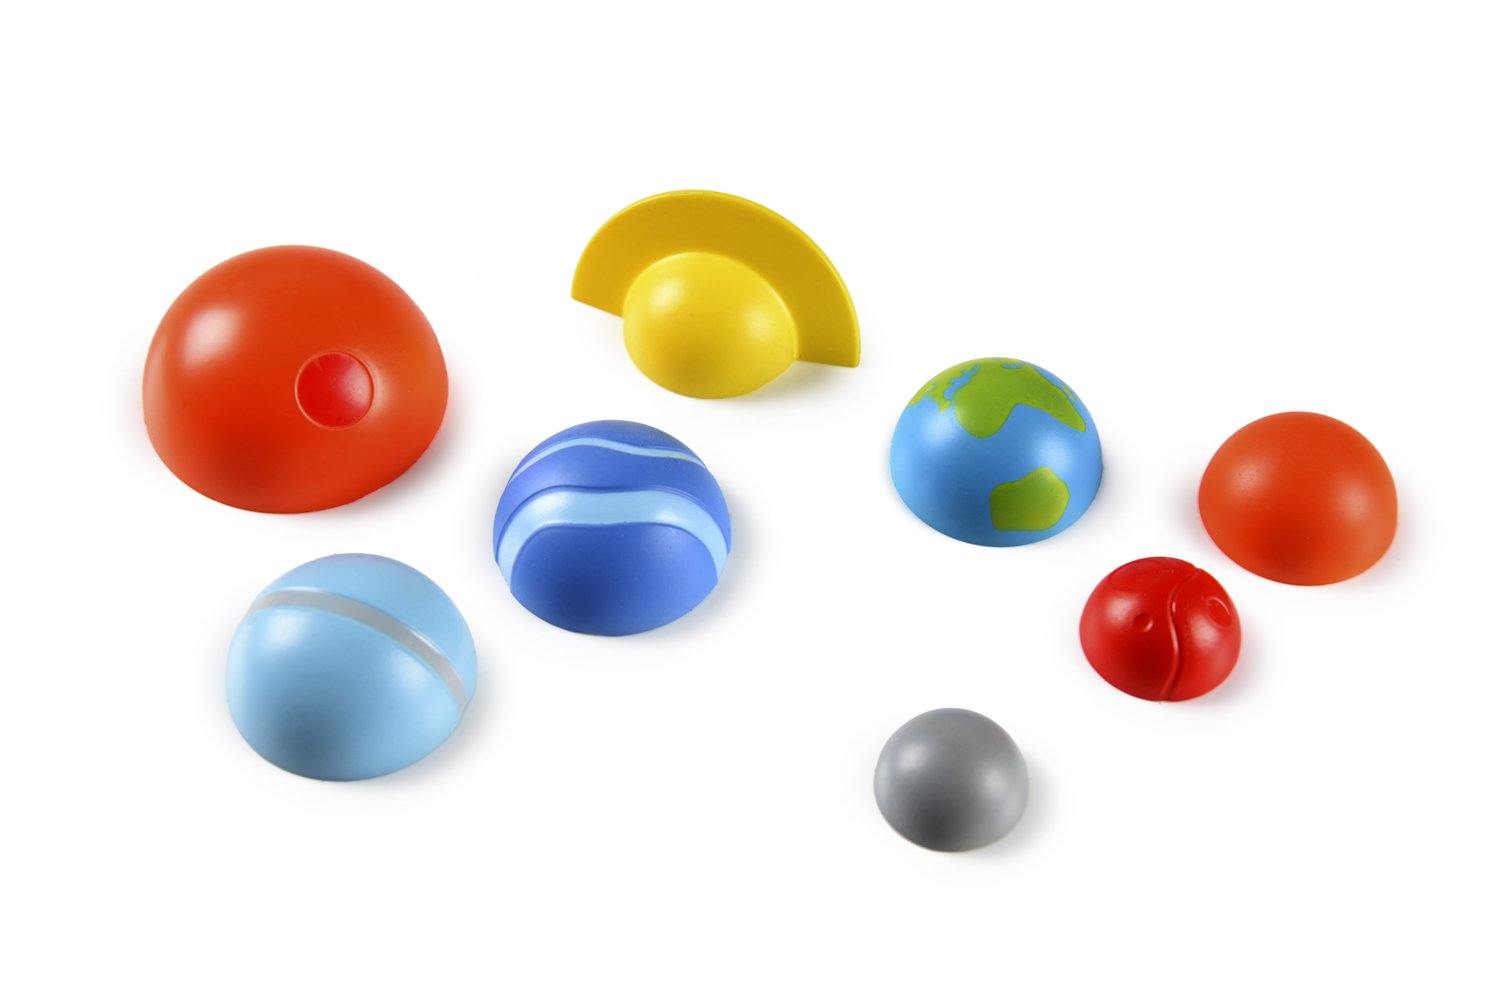 Science Museum Solar System Magnets - Magnets - Science Museum Shop